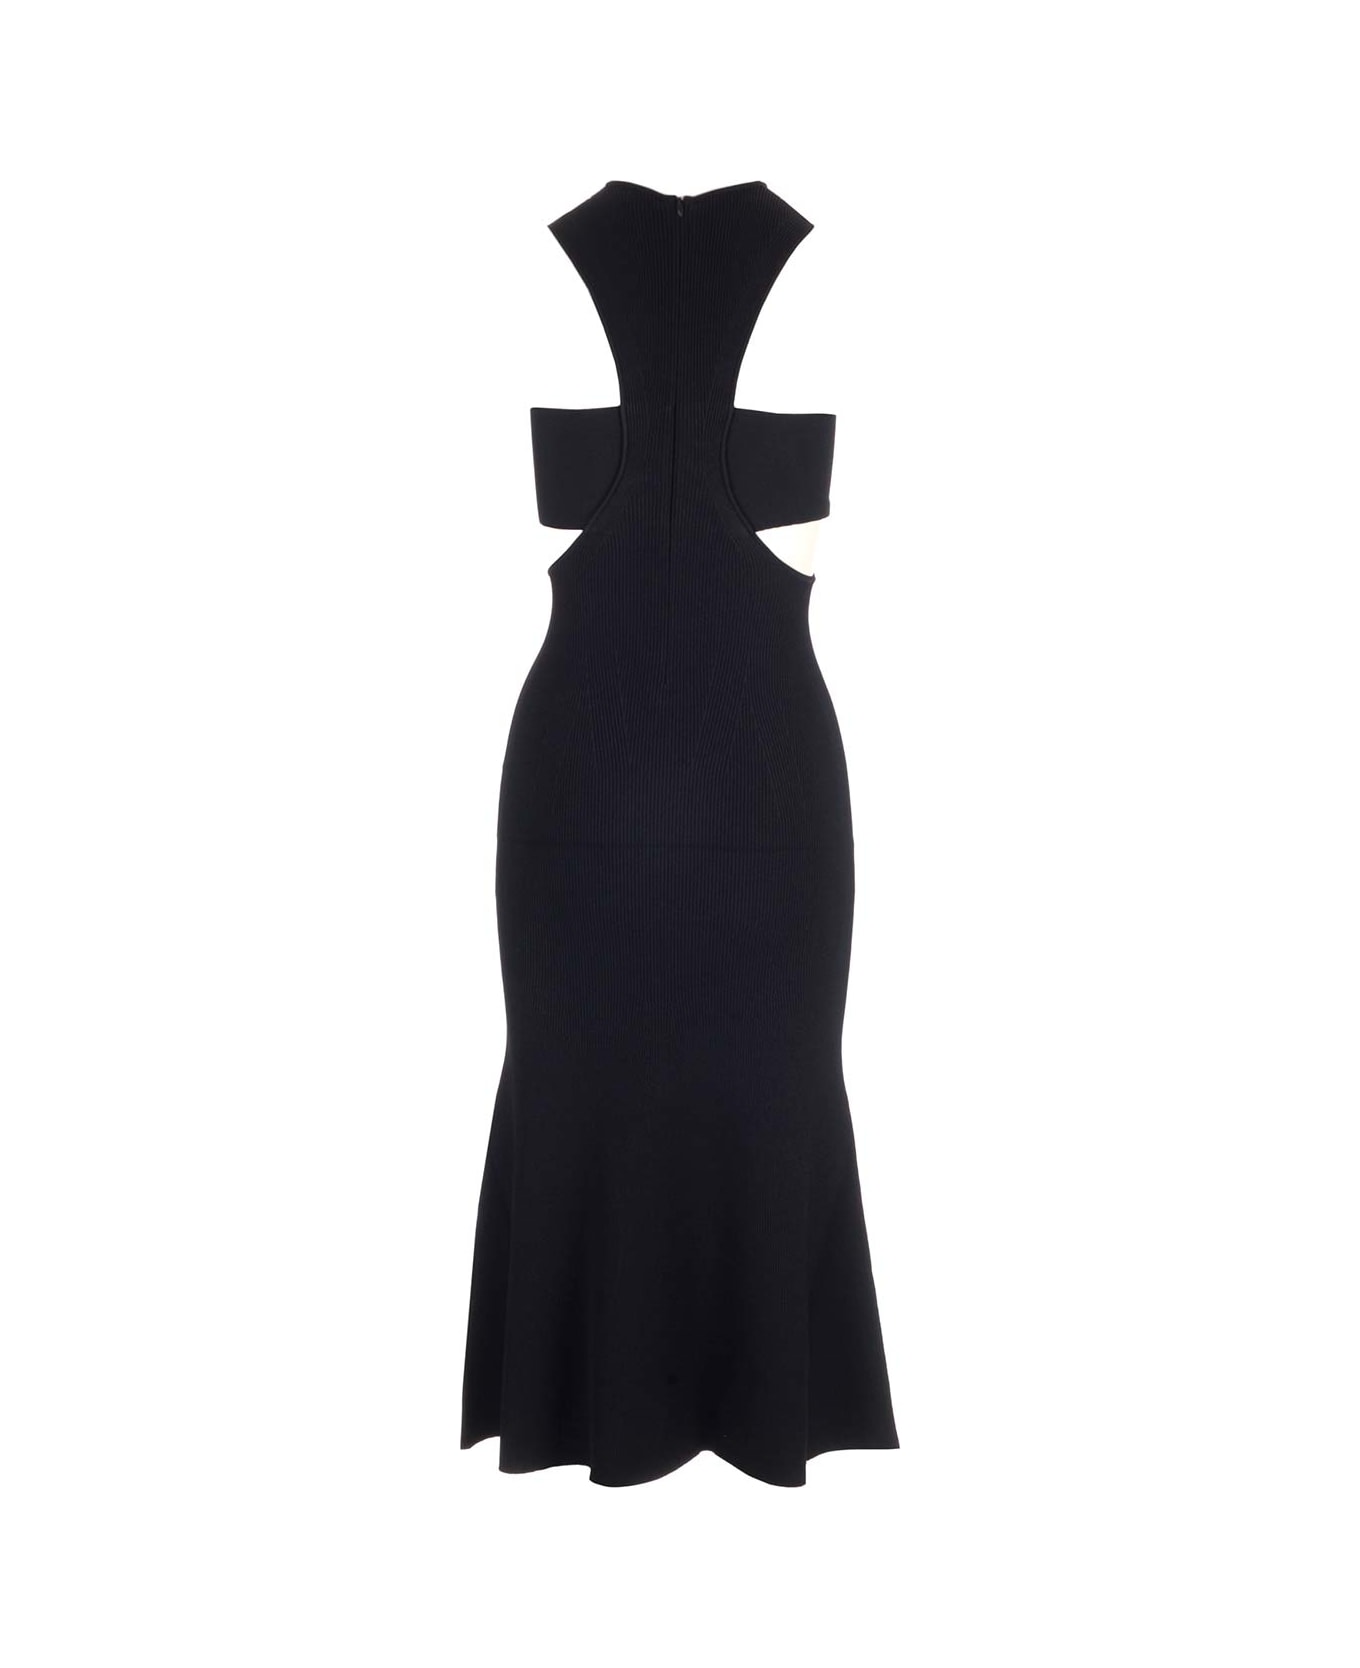 Alexander McQueen Dress With Harness And Cut-out In Black Ribbed Knit - Black